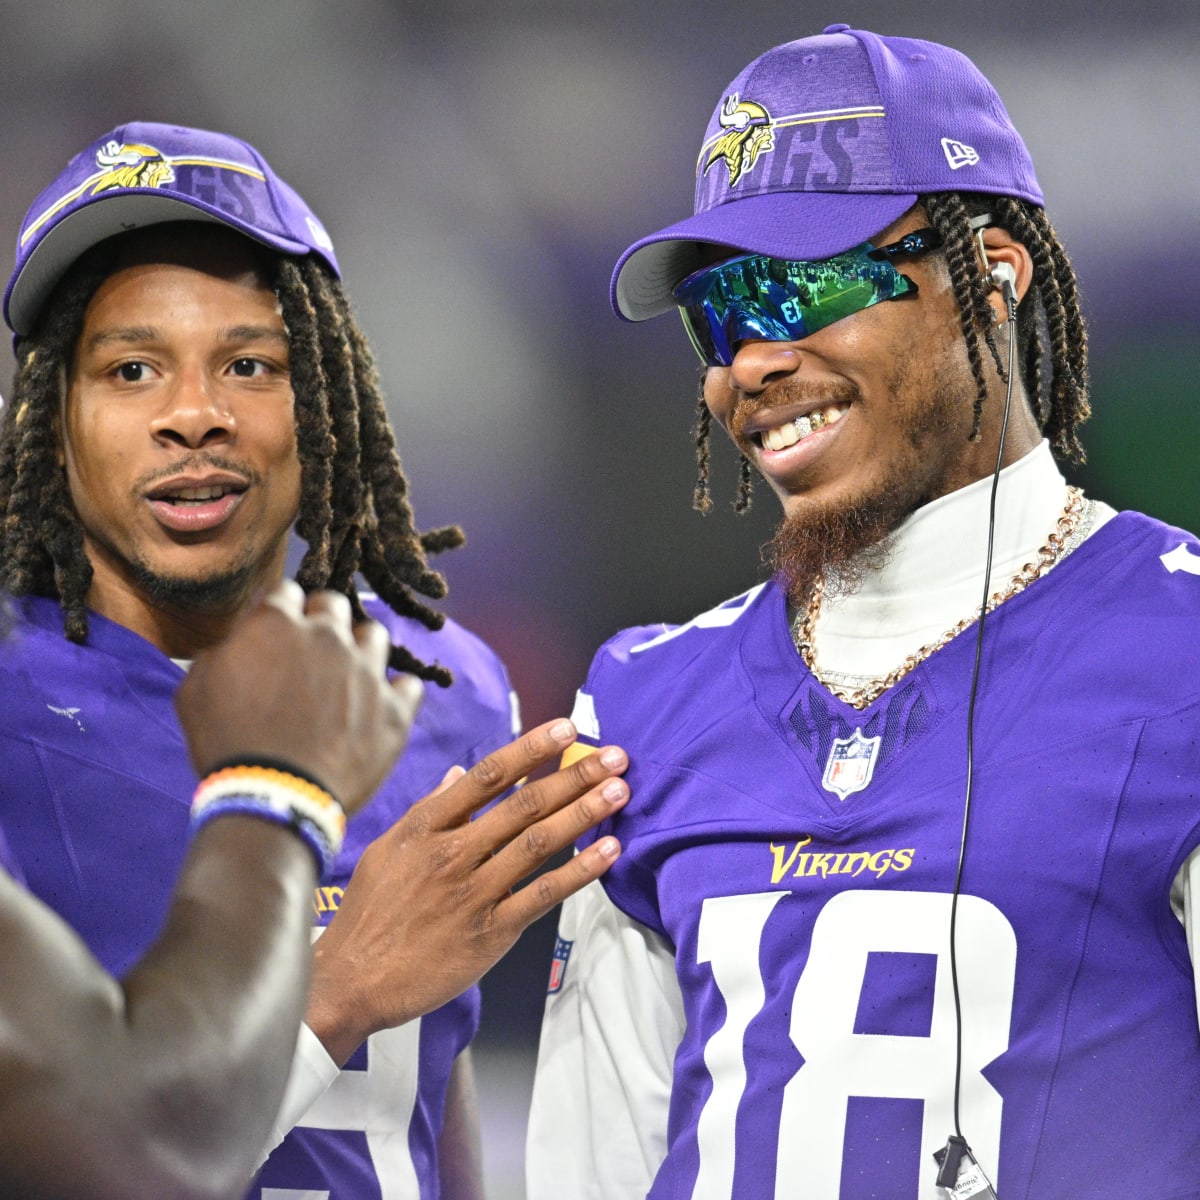 Vikings 2023 free agency: Follow the latest offseason roster moves